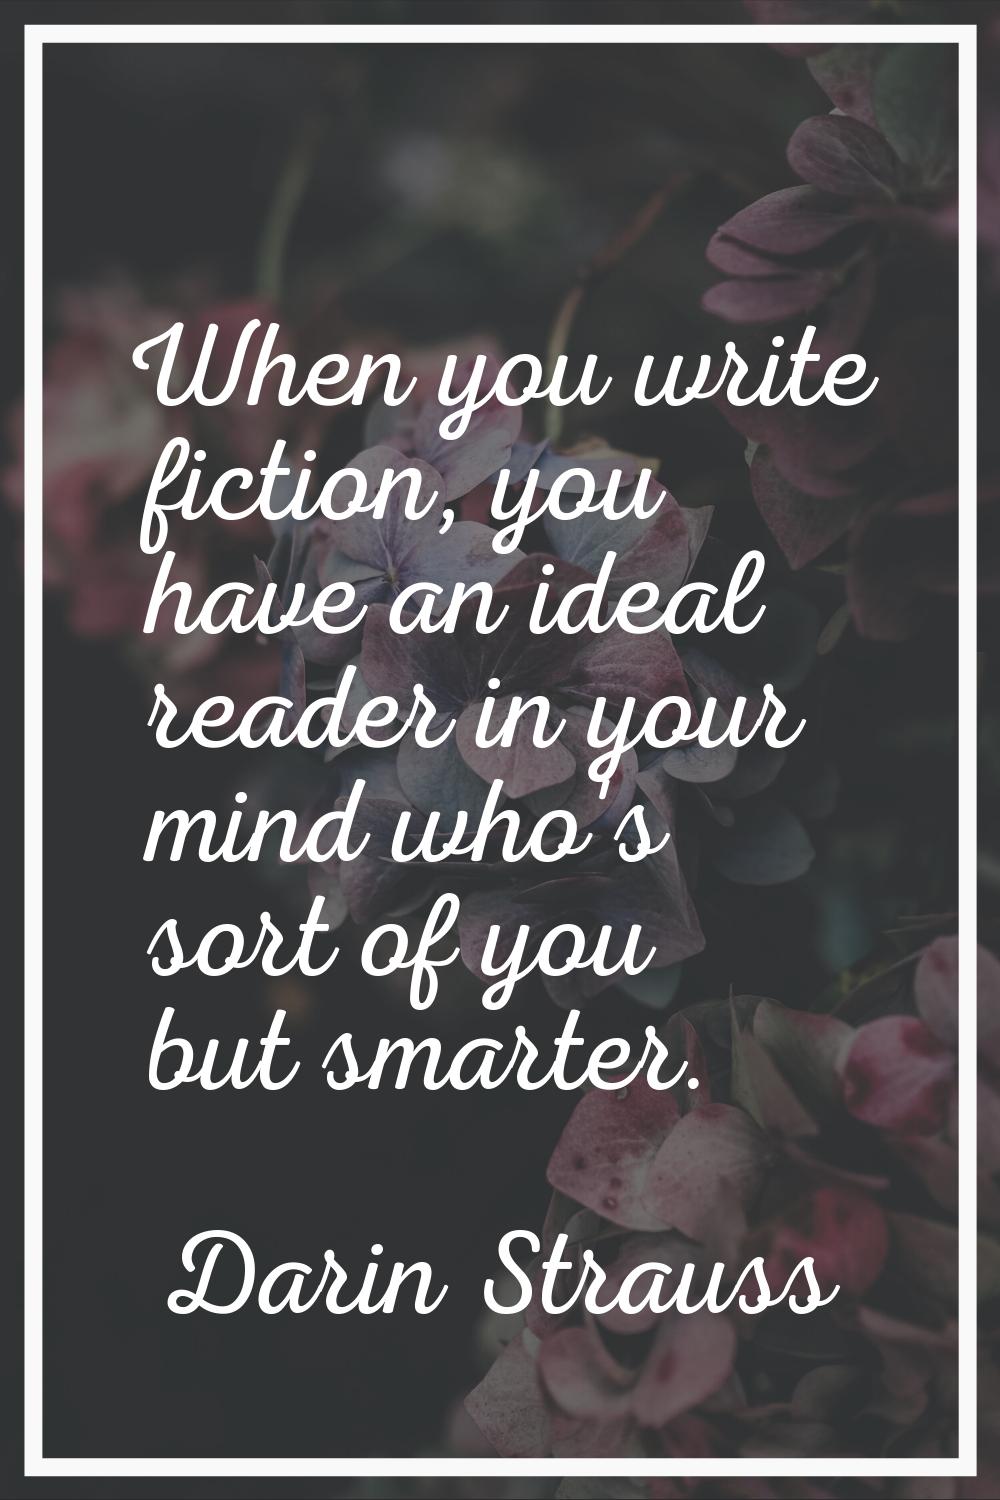 When you write fiction, you have an ideal reader in your mind who's sort of you but smarter.